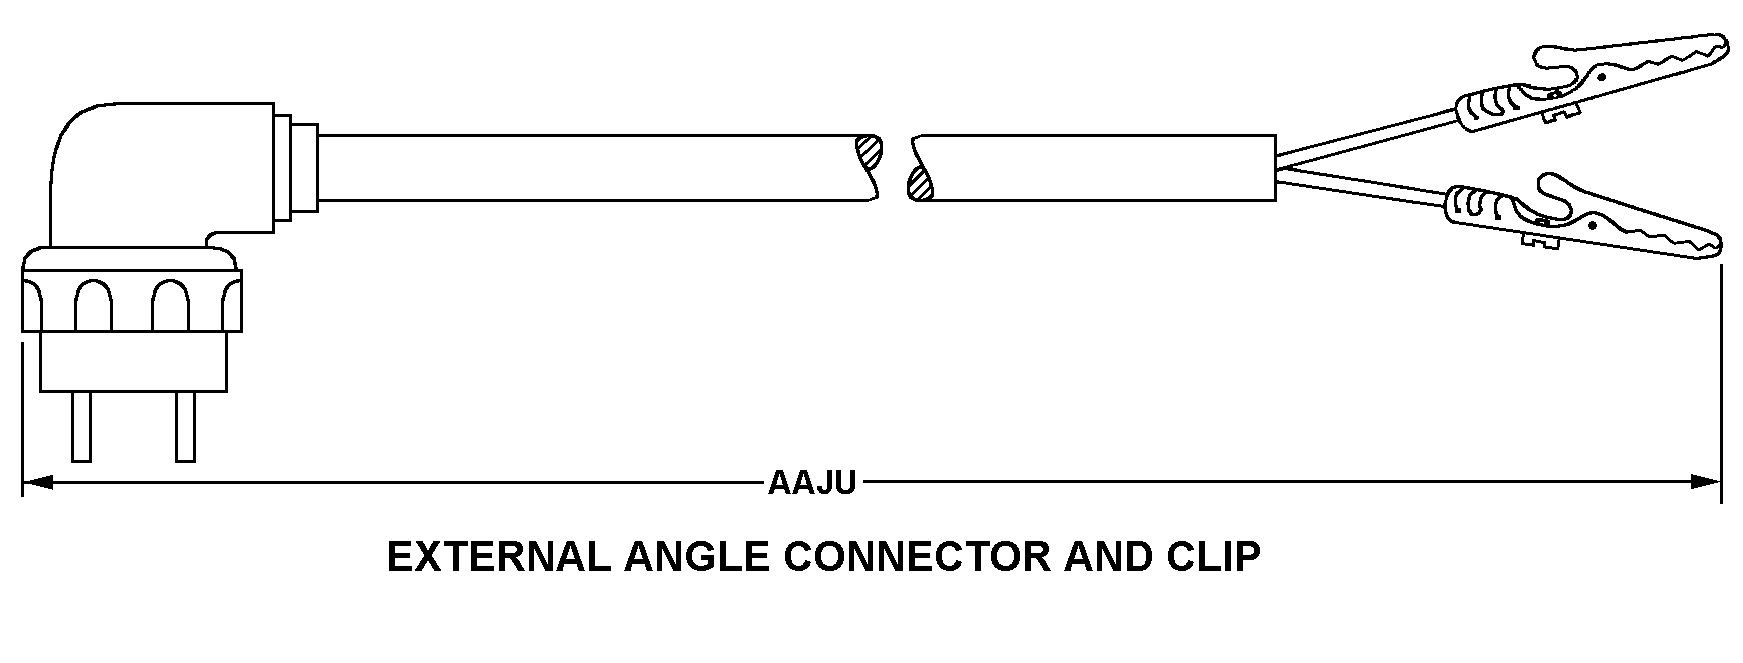 EXTERNAL ANGLE CONNECTOR AND CLIP style nsn 6150-00-234-6997